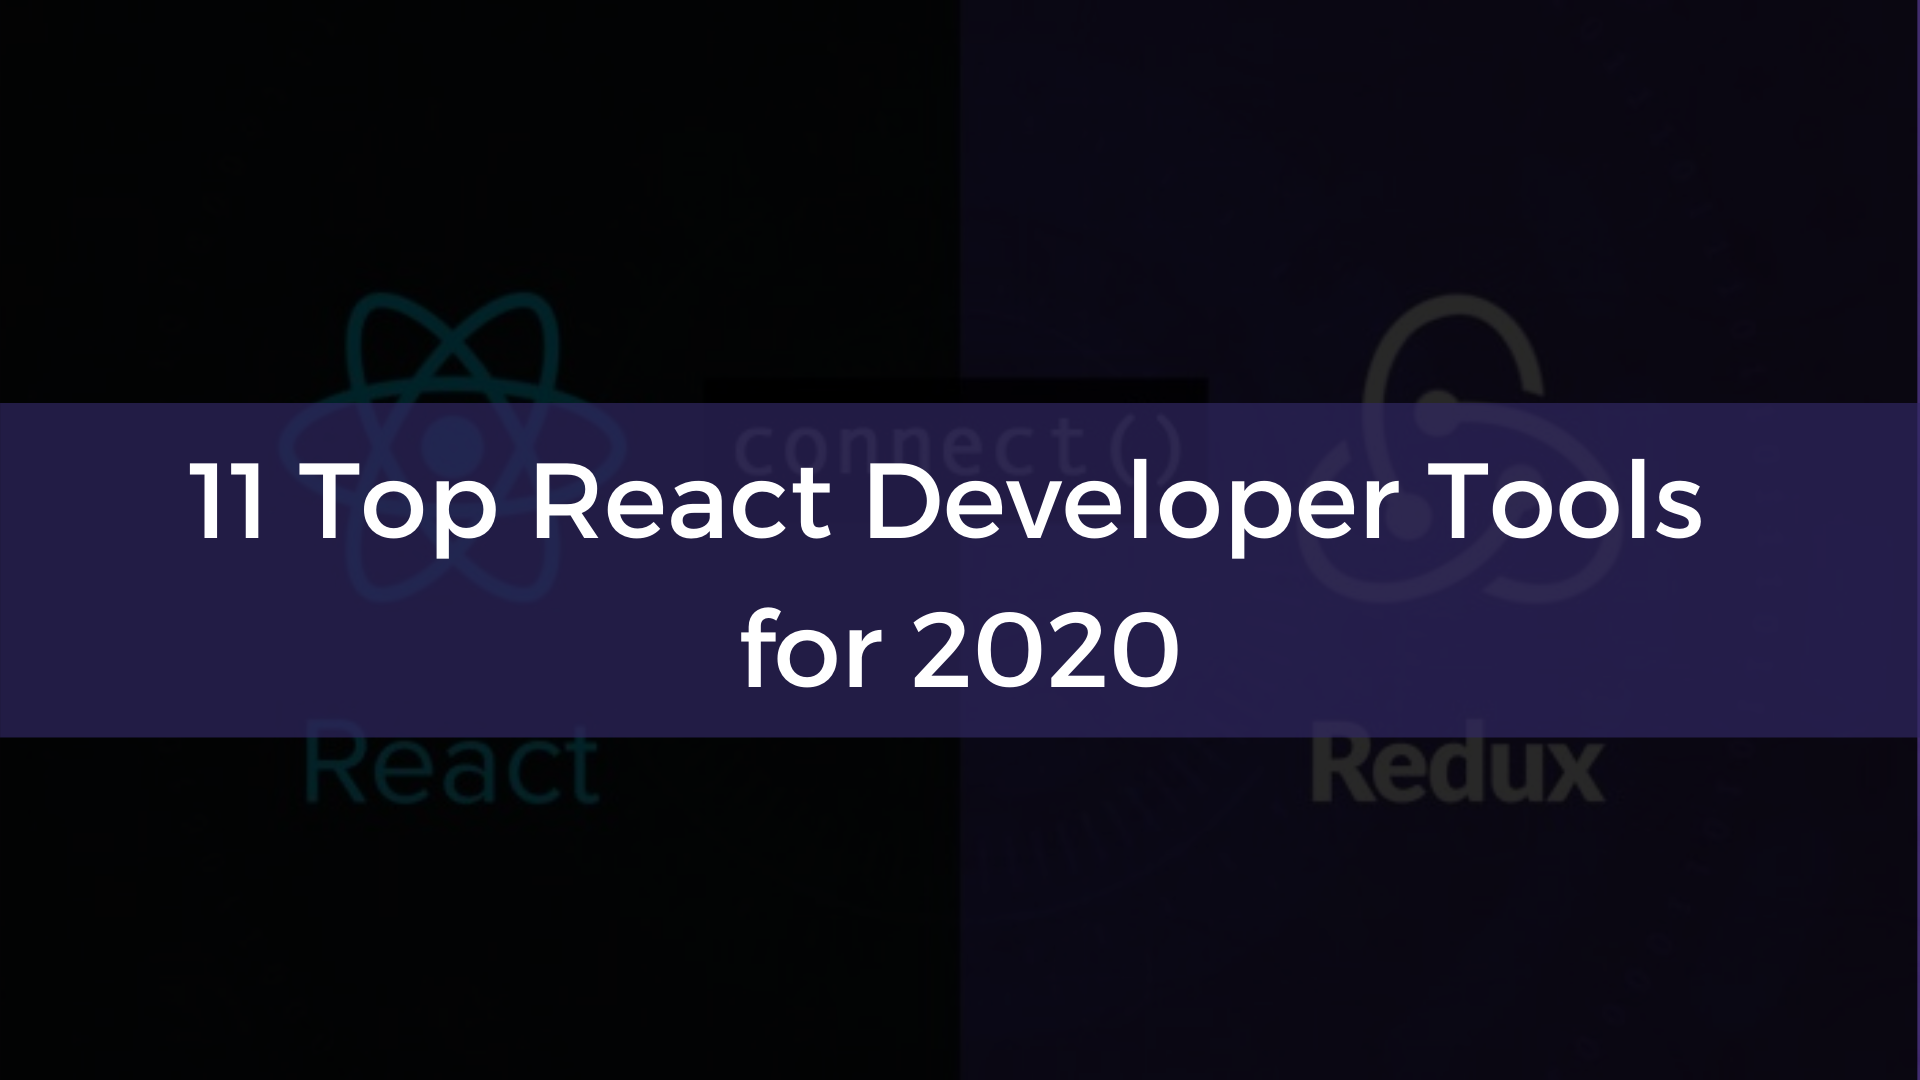 11 Top React Developer Tools for 2020